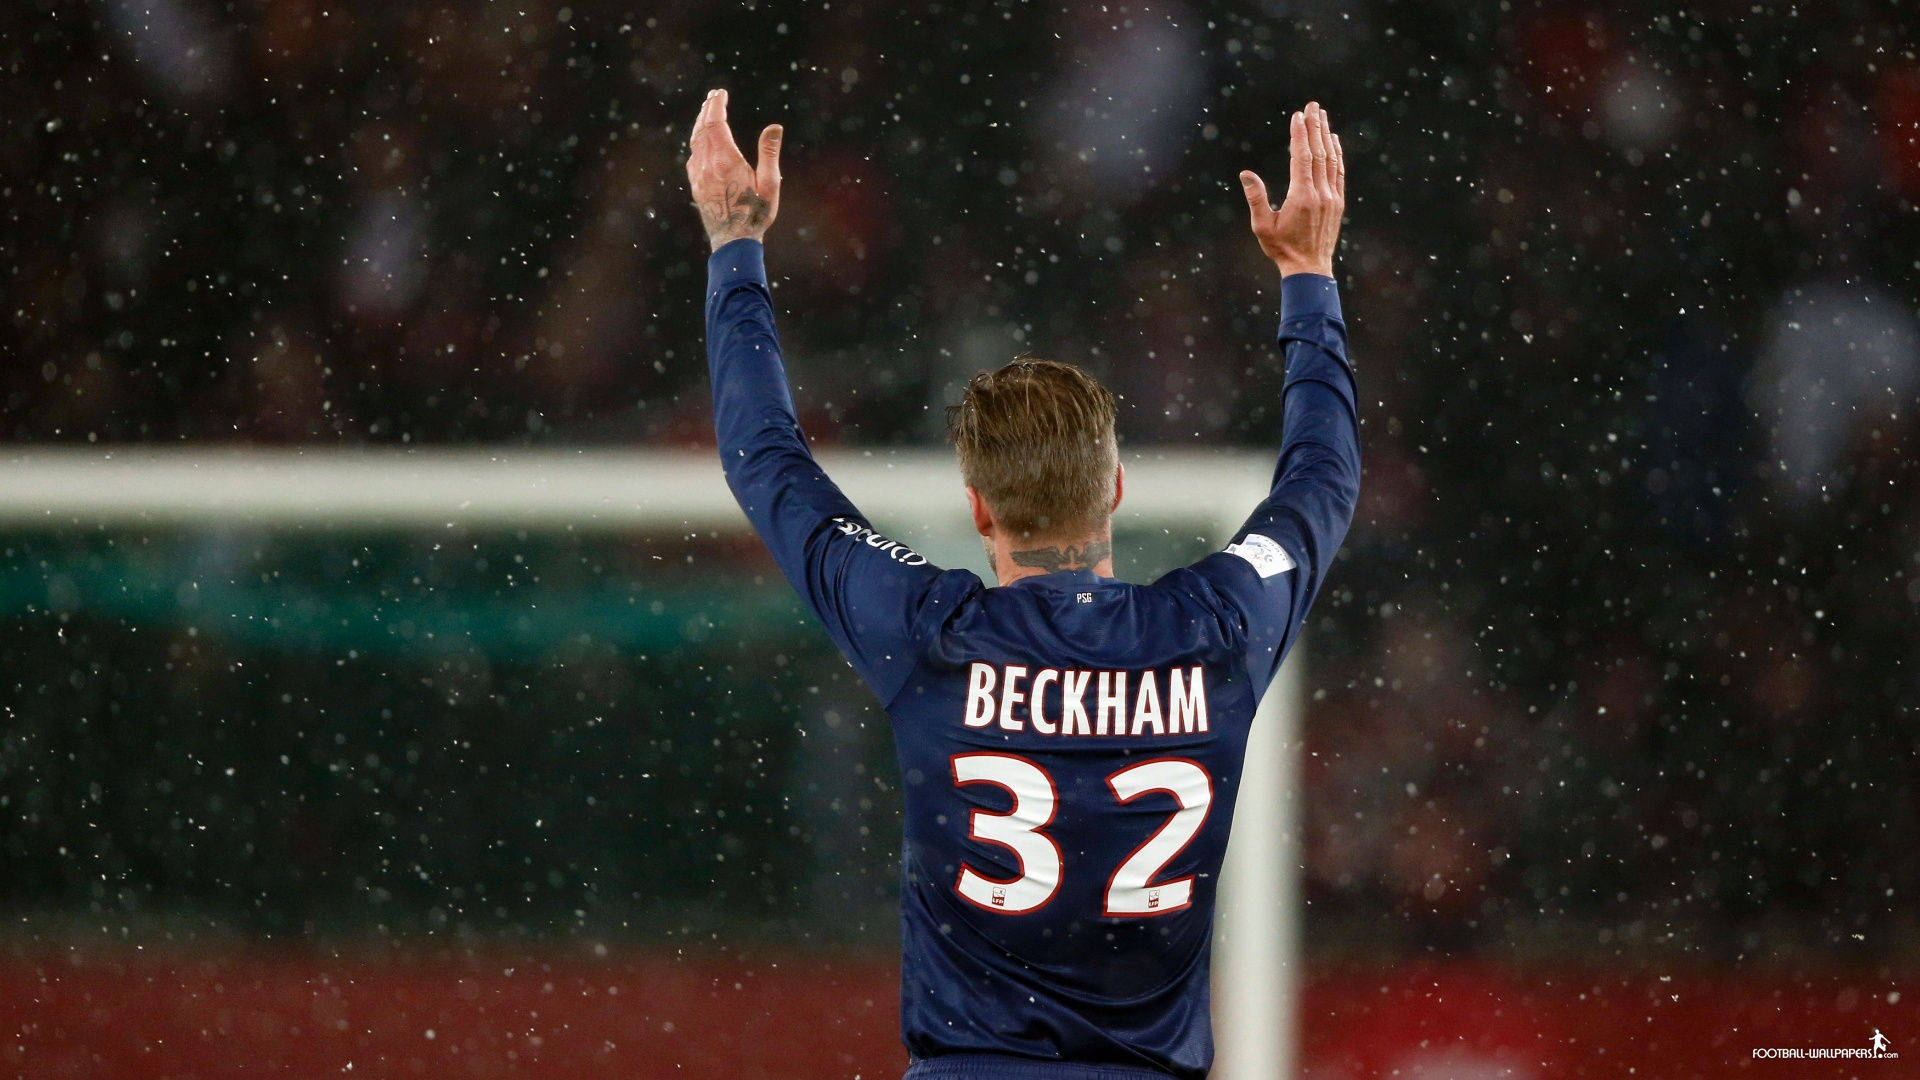 Free David Beckham Pictures , [100+] David Beckham Pictures for FREE |  